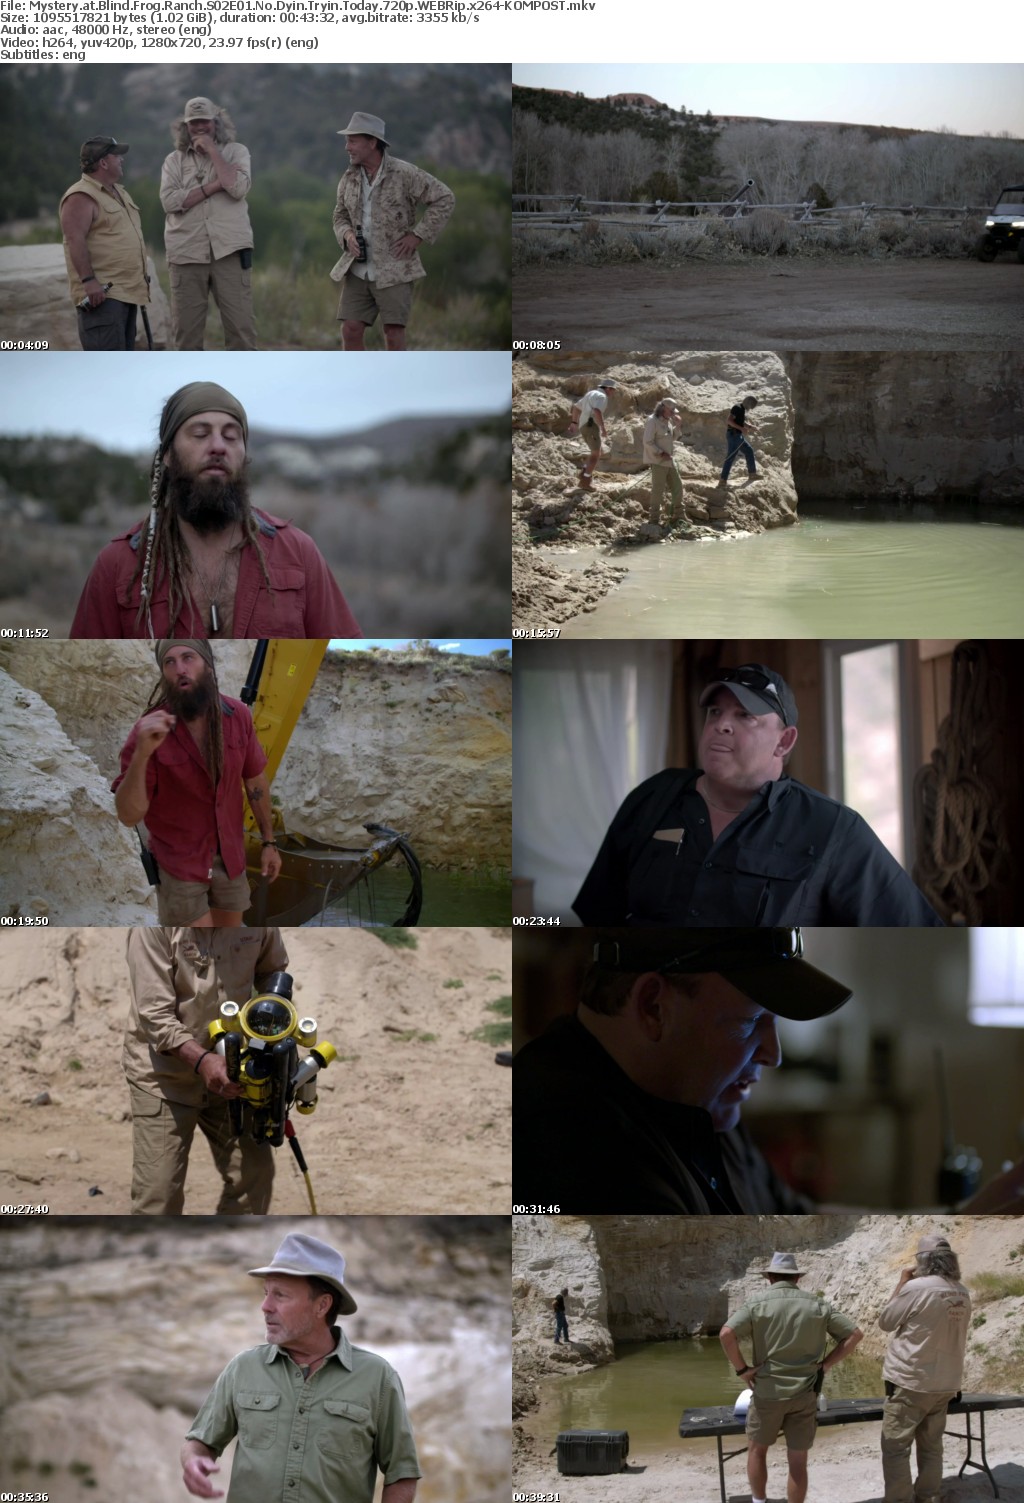 Mystery at Blind Frog Ranch S02E01 No Dyin Tryin Today 720p WEBRip x264-KOMPOST